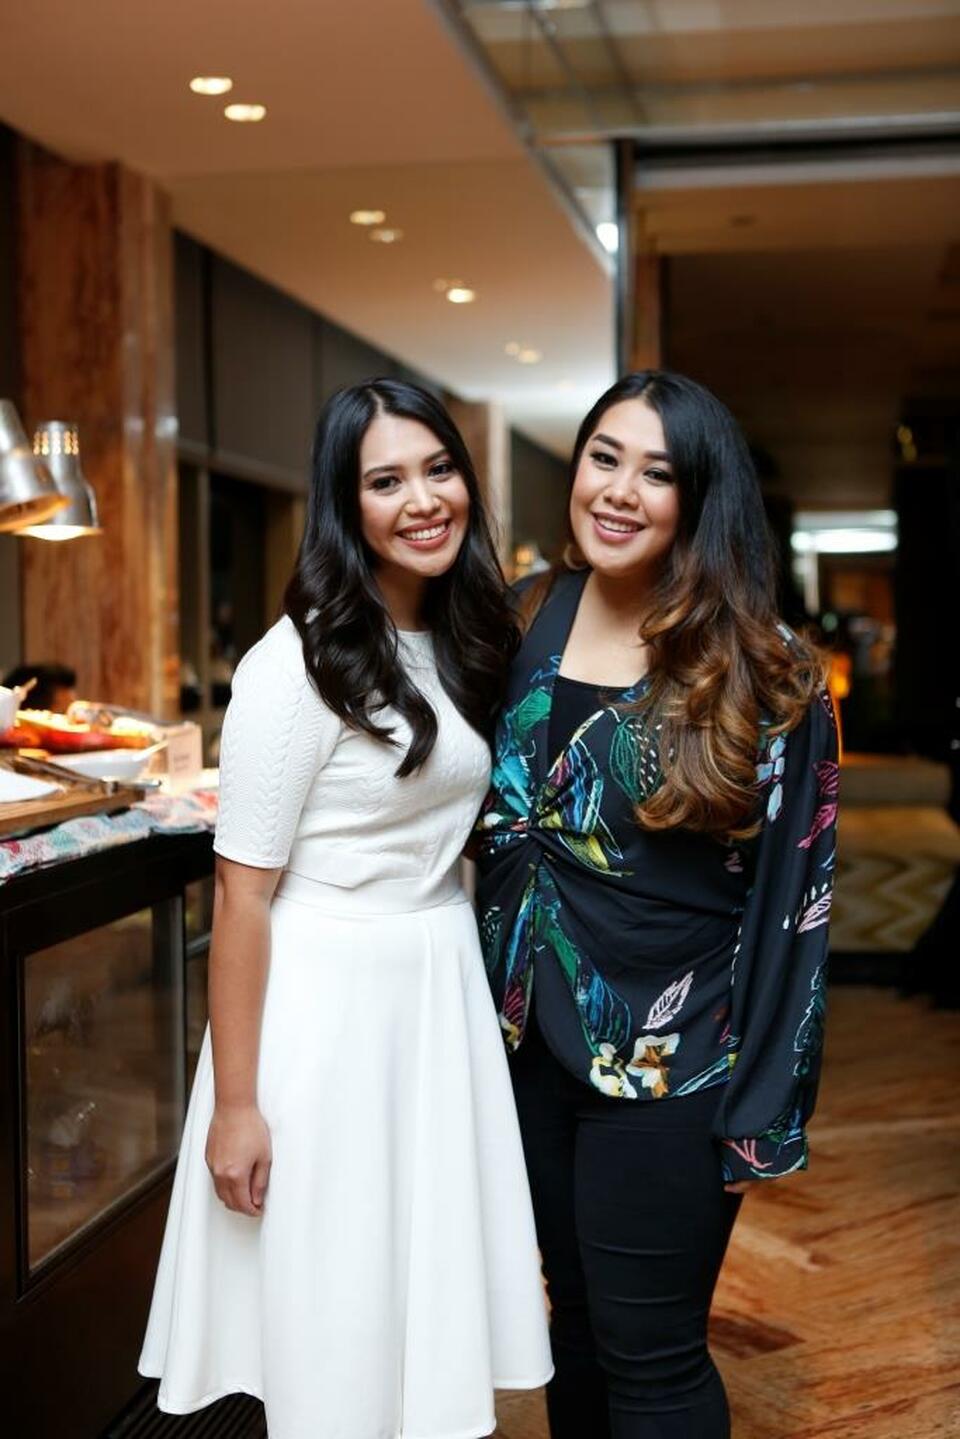 Indonesian siblings Tasia and Gracia have made it to the Top 13 in the Australian cooking show, "My Kitchen Rules." (Photo courtesy of NBC Universal)